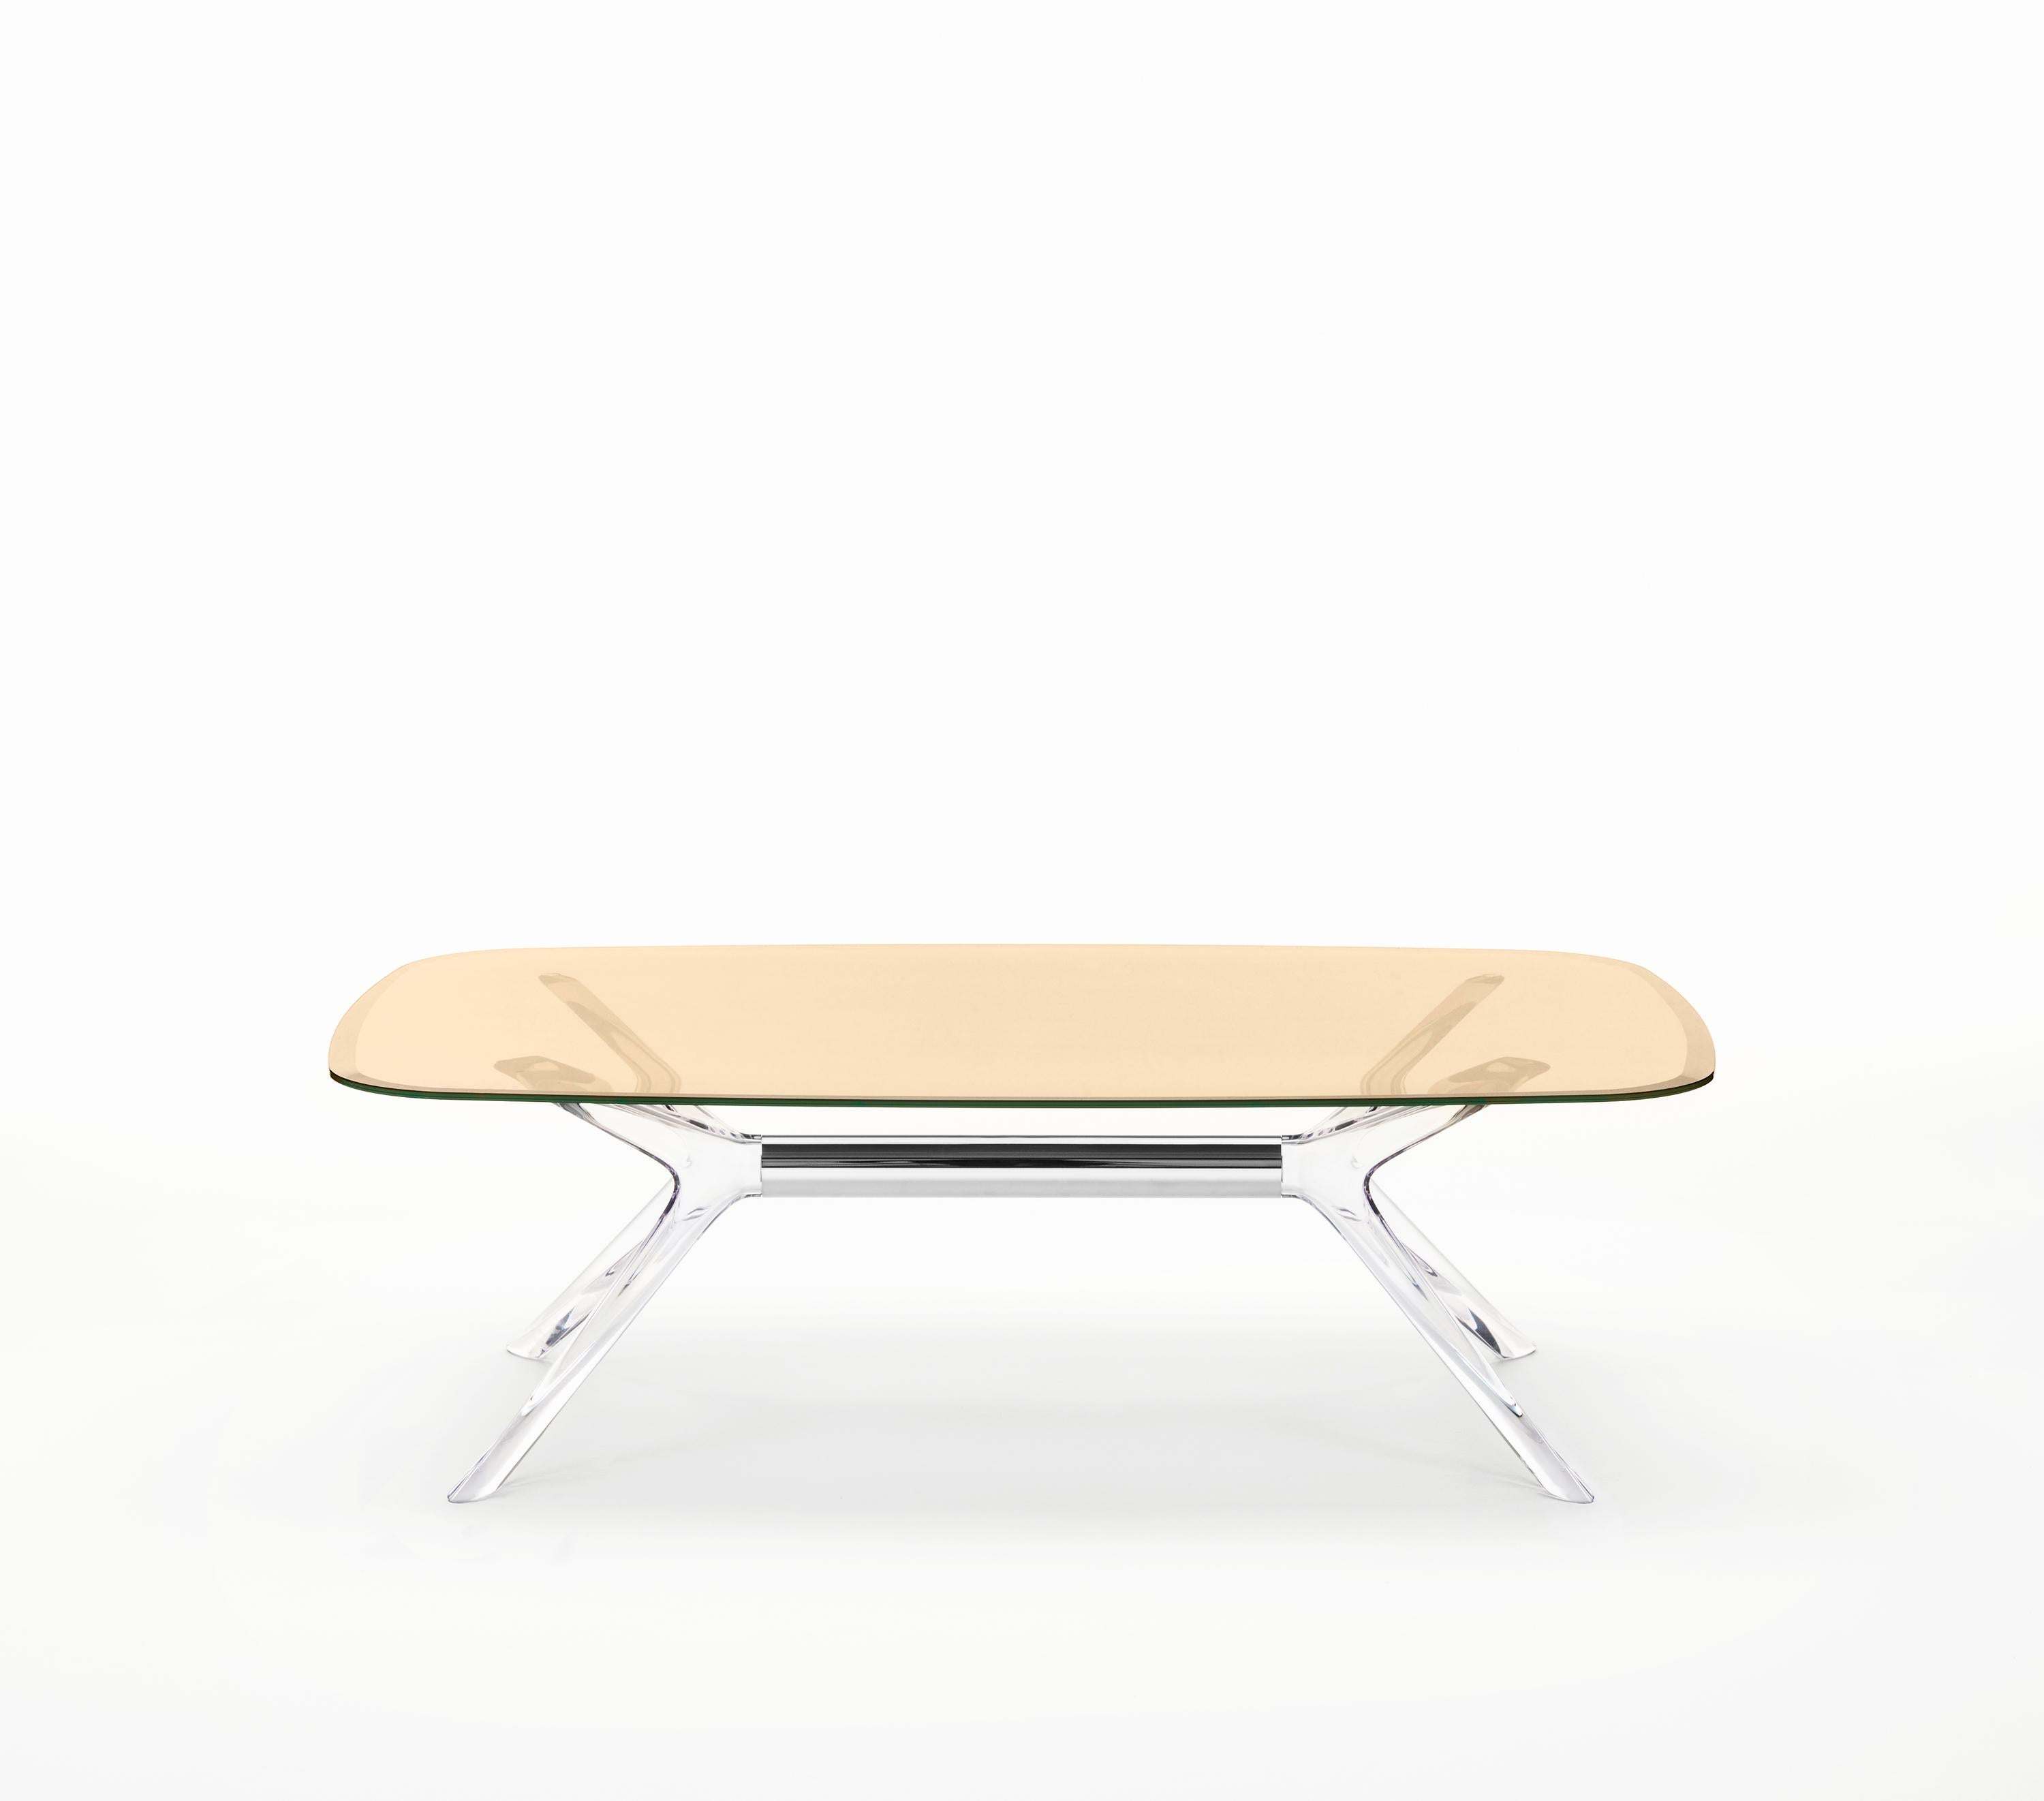 Kartell lifestyle enhances the living room with Philippe Starck’s Blast, a coffee table rectangular with rounded corners and clear bases and tops. The design is a development of the Sir Gio table. The central core of the base is